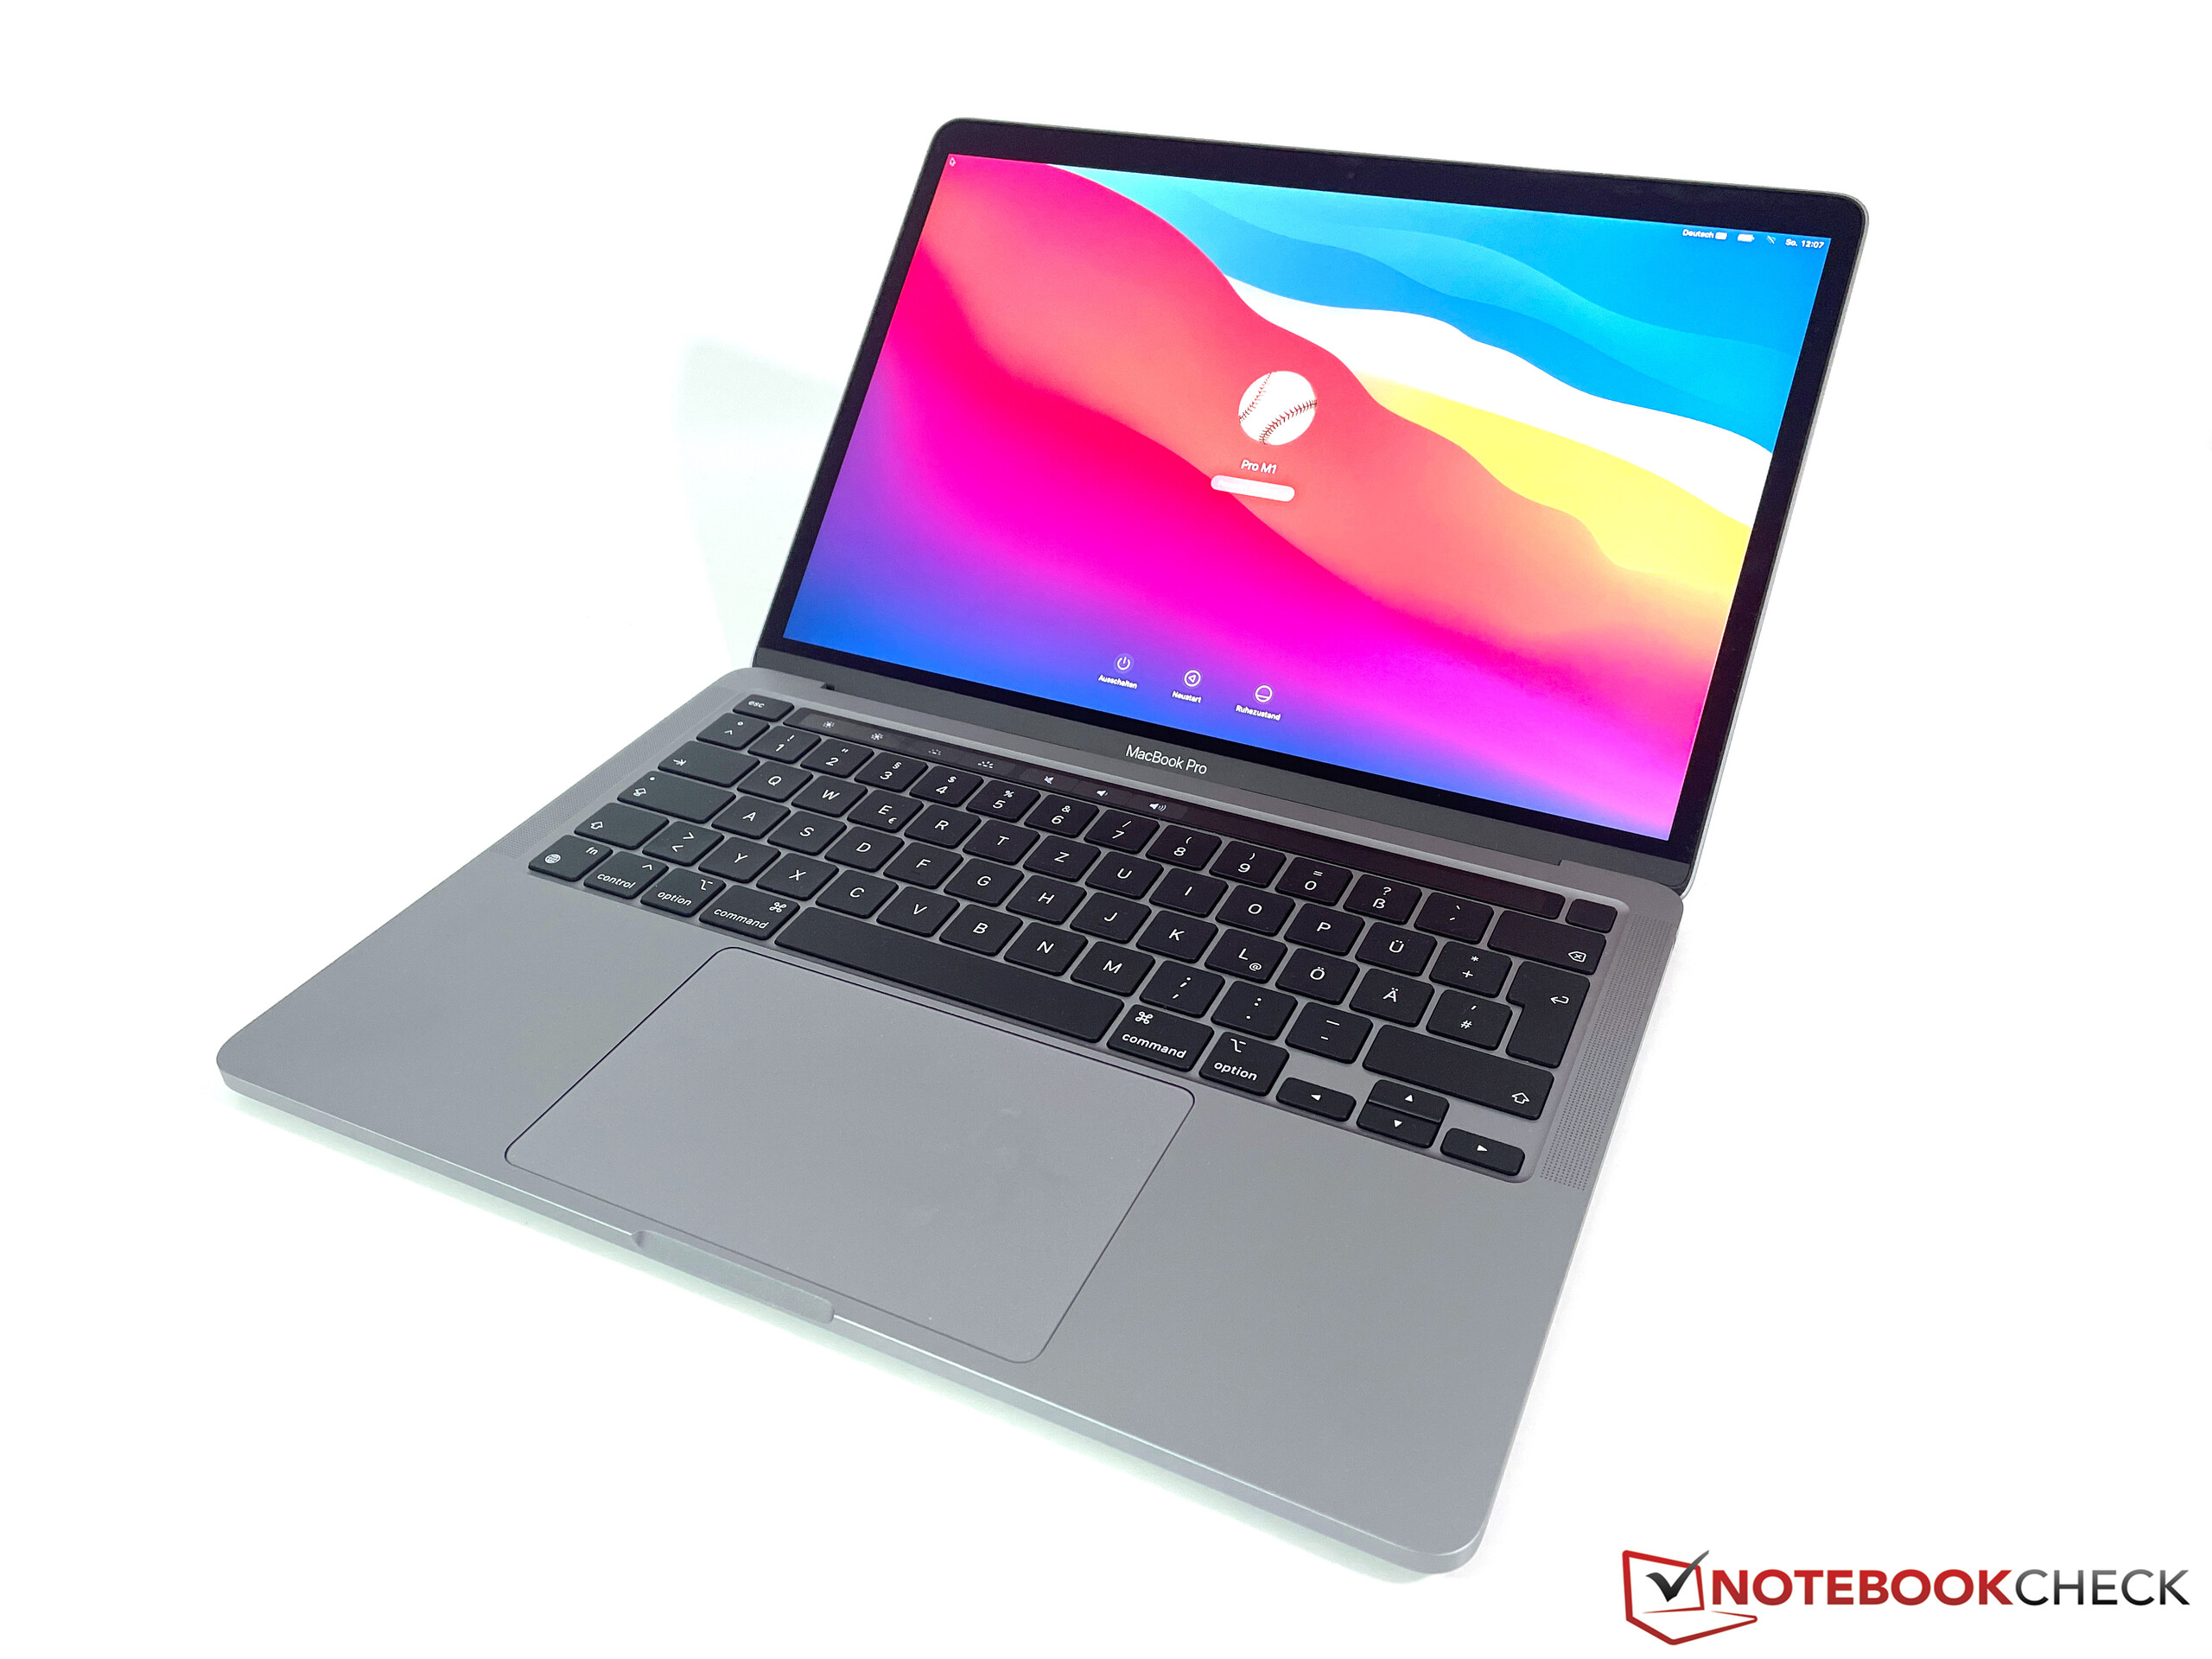 Apple MacBook Pro performance Reviews 13 boost the Laptop entry-level also gets - Pro NotebookCheck.net The M1 Review: 2020